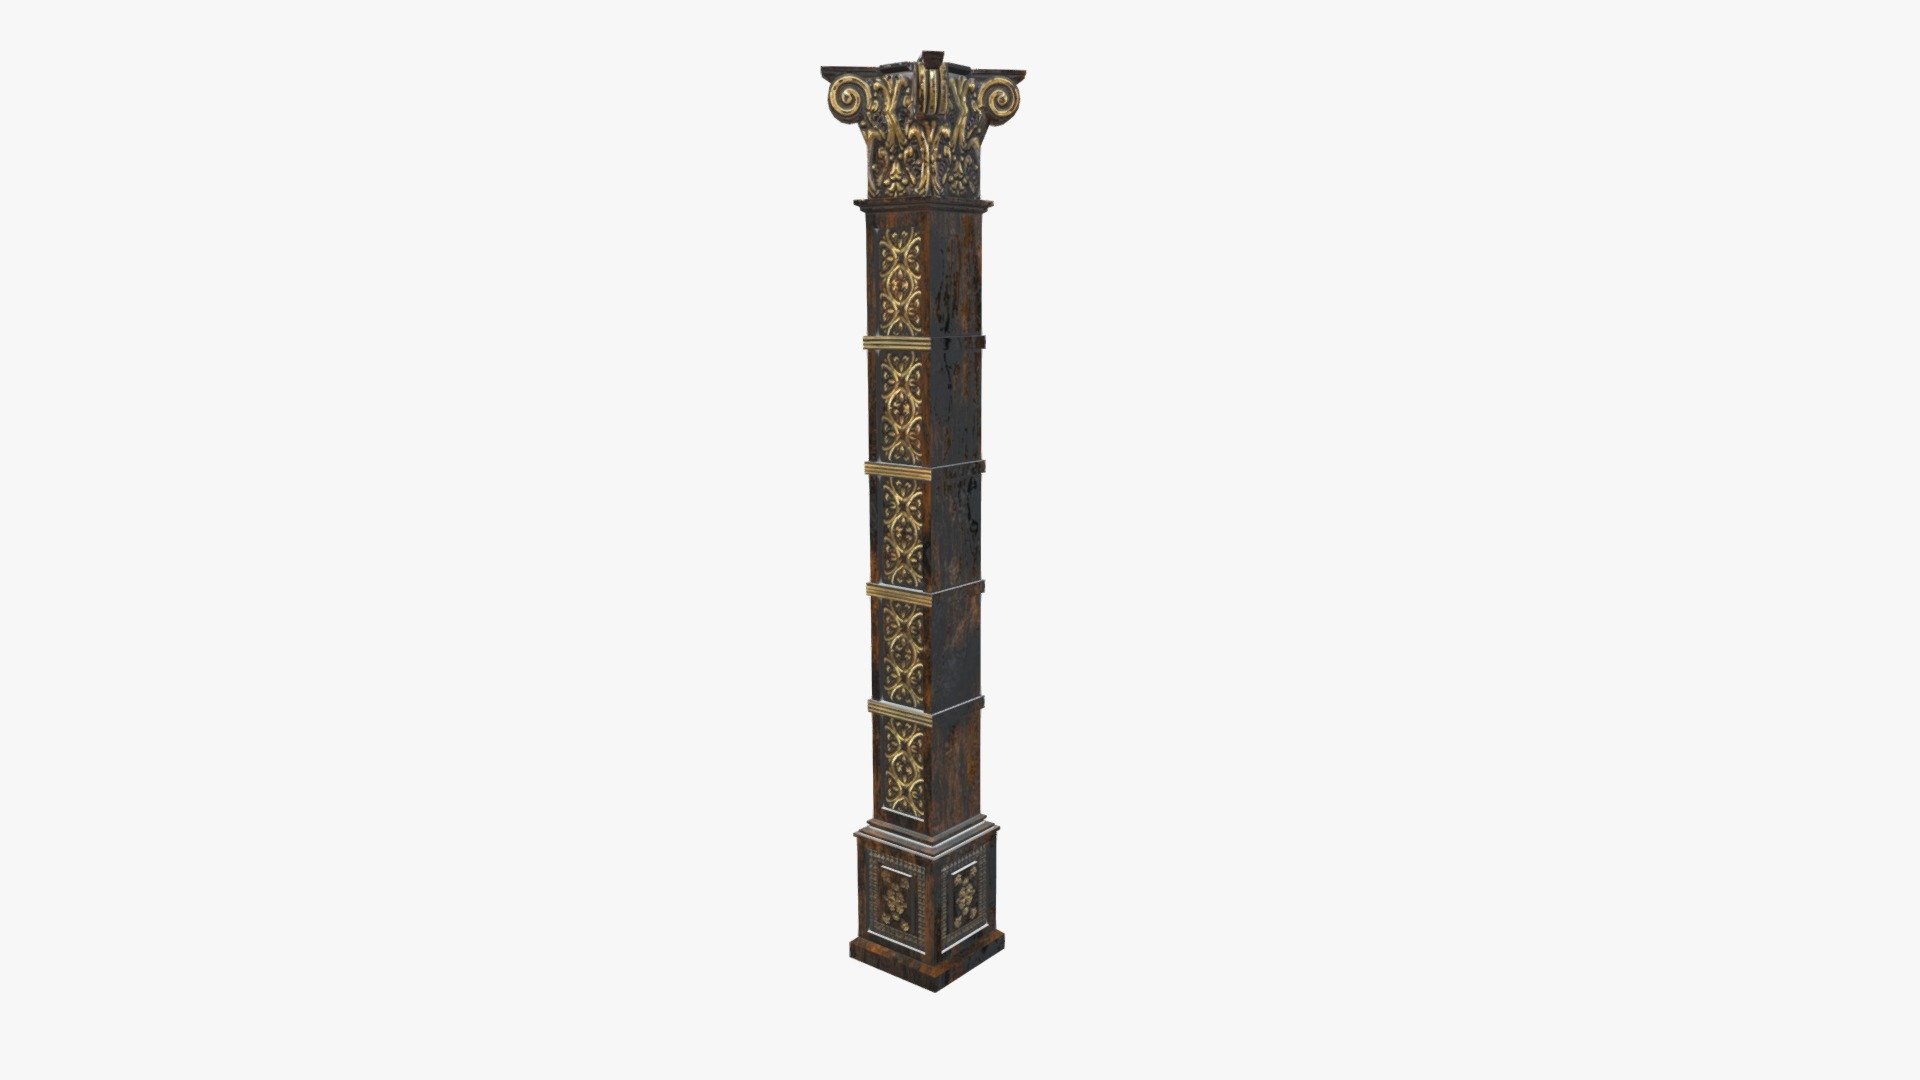 Check out my website for more products and better deals! &amp;gt;&amp;gt; SM5 by Heledahn &amp;lt;&amp;lt;

This is a digital 3D model of a Victorian Gothic Square Column. It has been shaded in varnished wood with inlaid golden ivy details.

This model can be used for any Medieval/Period/Fantasy themed render project, used either as a background prop, or as a closeup prop due to its high detail and visual quality.

This product will achieve realistic results in your rendering projects and animations, being greatly suited for close-ups due to their high quality topology and PBR shading 3d model